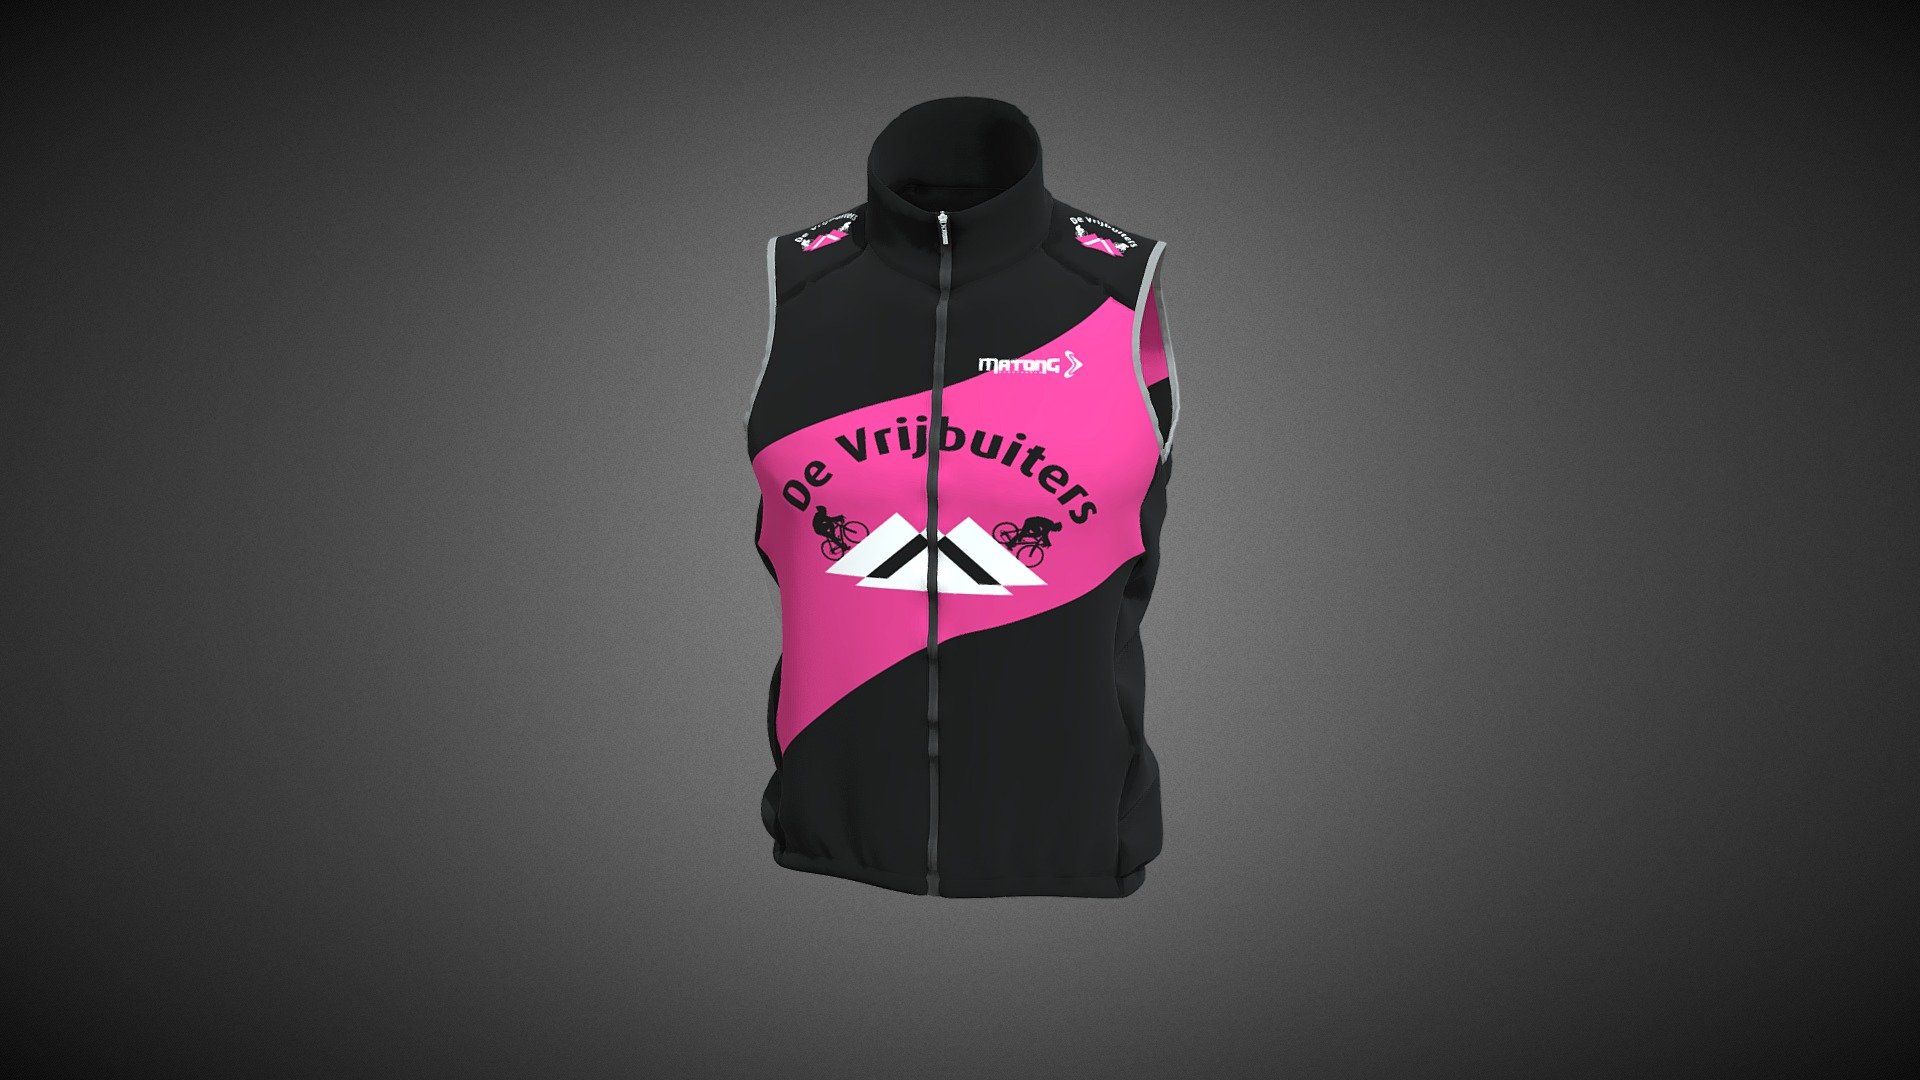 09089 - VRIJBUITERS 2022 PINK FLUO - 3D model by Matong [fc7a889 ...